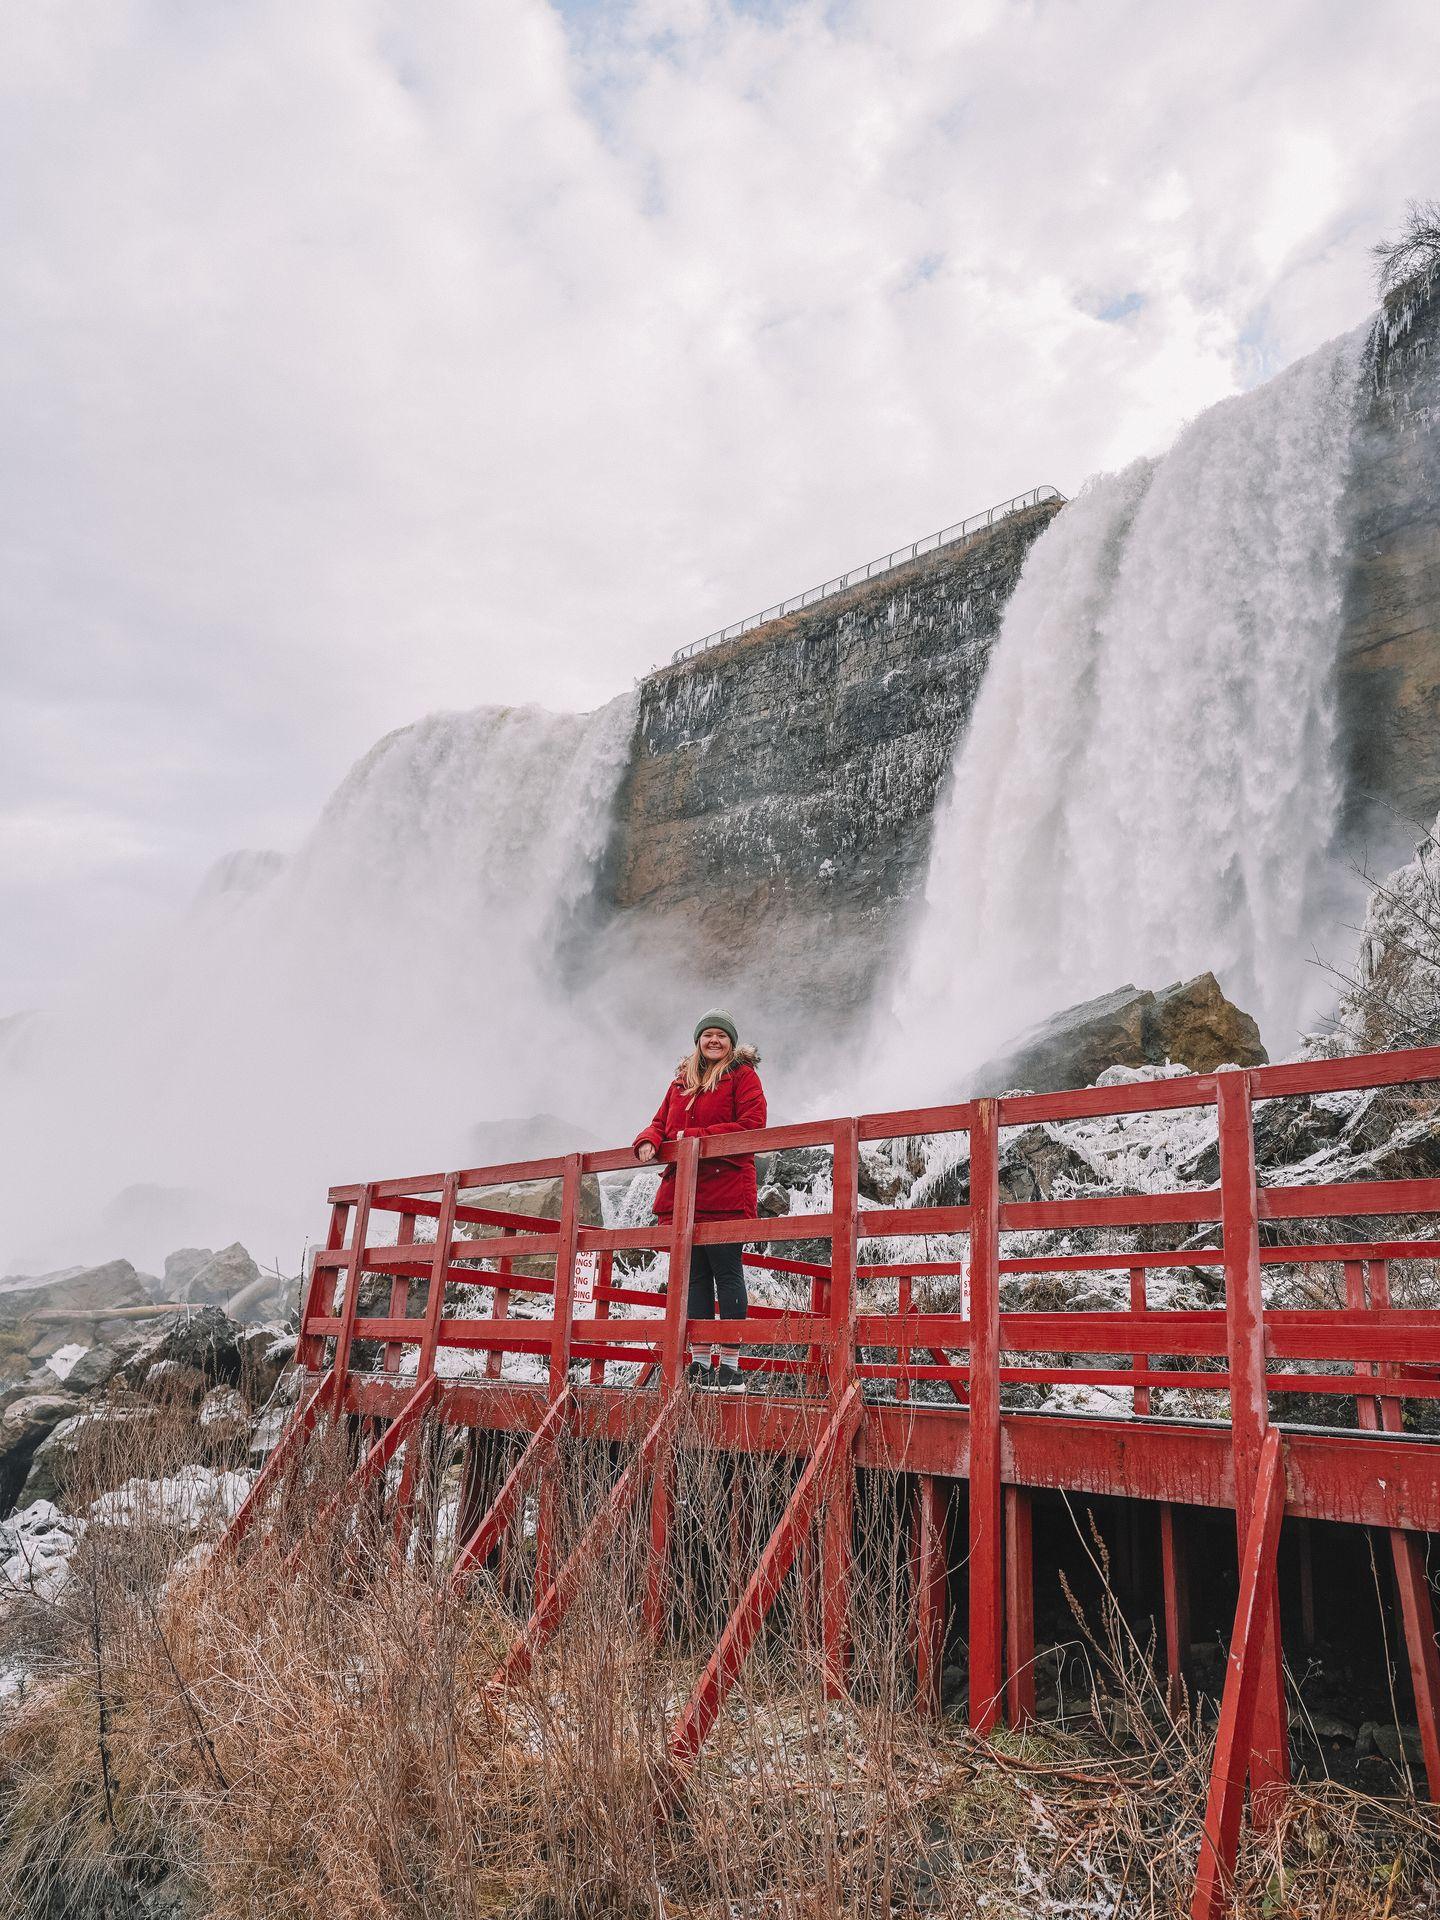 Lydia standing next to a red fence and wearing a red jacket at Cave of the Winds in Niagara Falls.